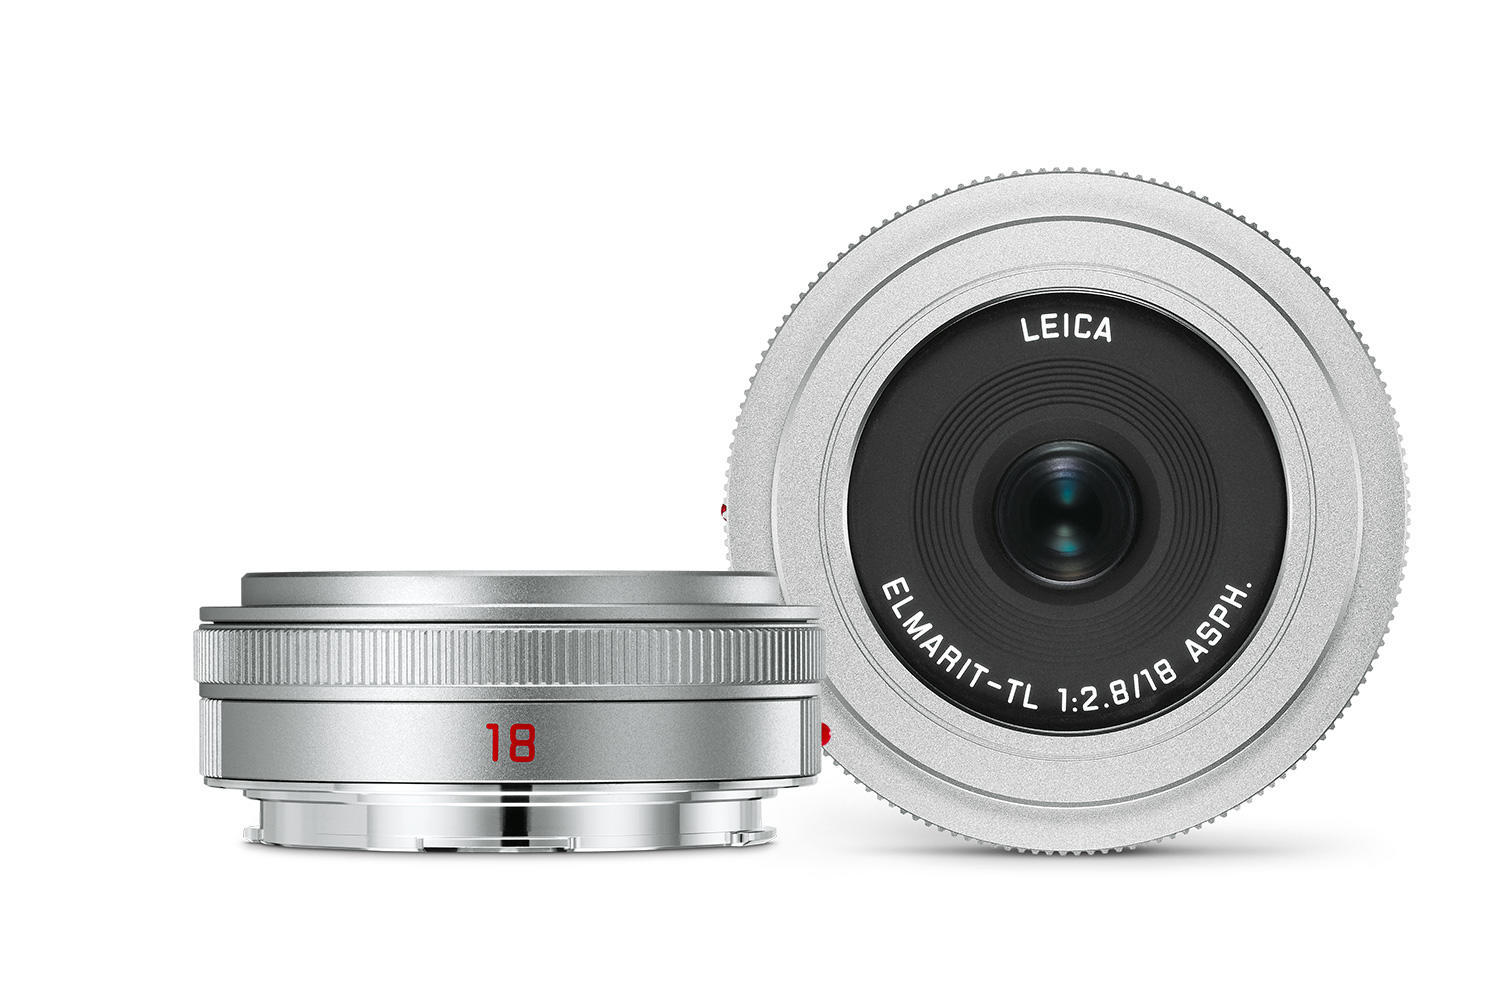 New Leica T and TL firmware updates add support for the new Elmarit-TL 18 f/2.8 ASPH lens - Leica Rumors